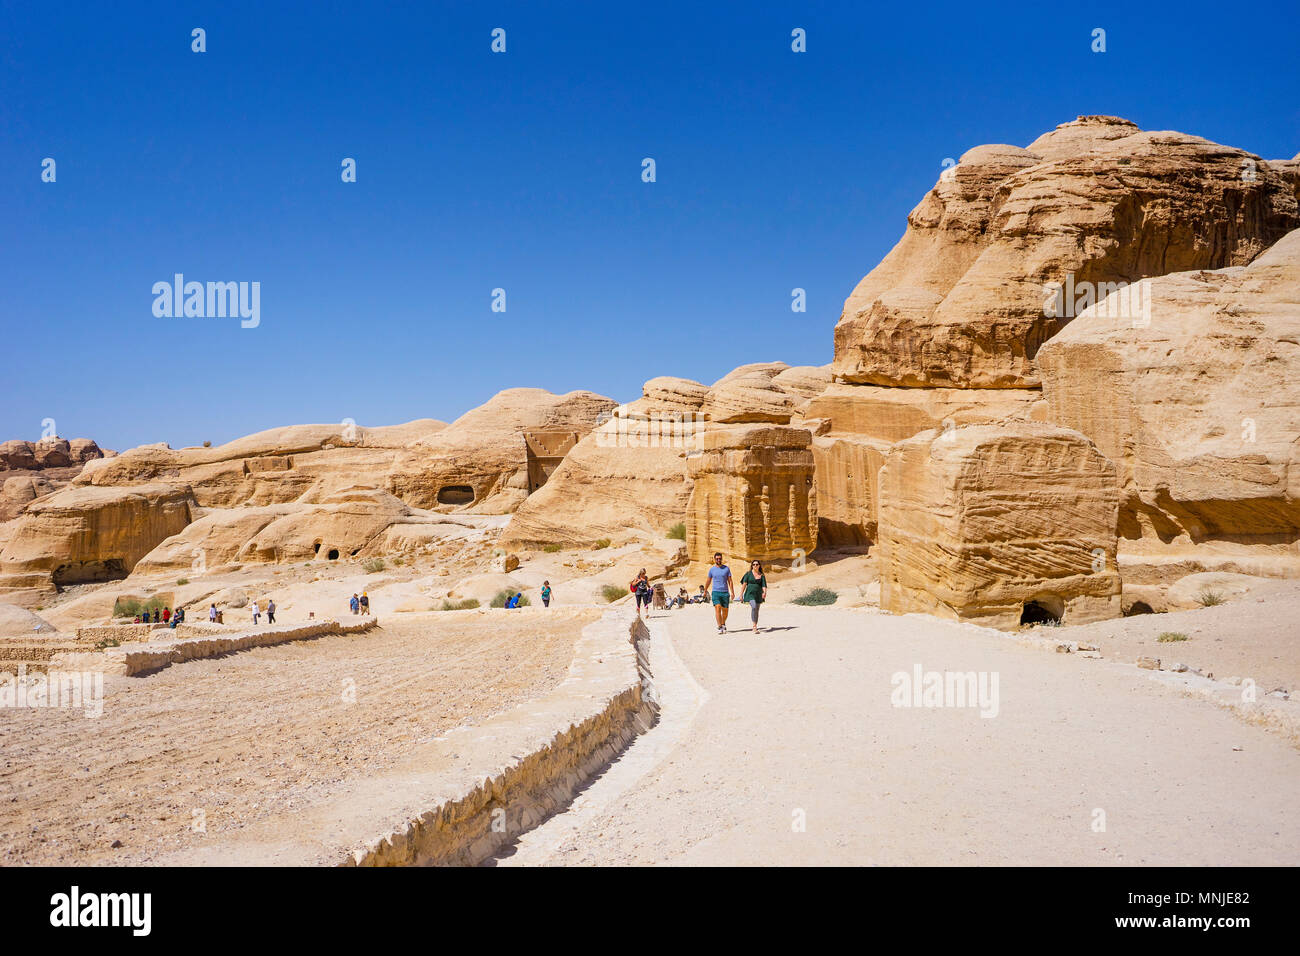 Tourists walking on footpath entering Petra from Visitors Center with tombs and temples carved in sandstone, Wadi Musa, Maan Governorate, Jordan Stock Photo